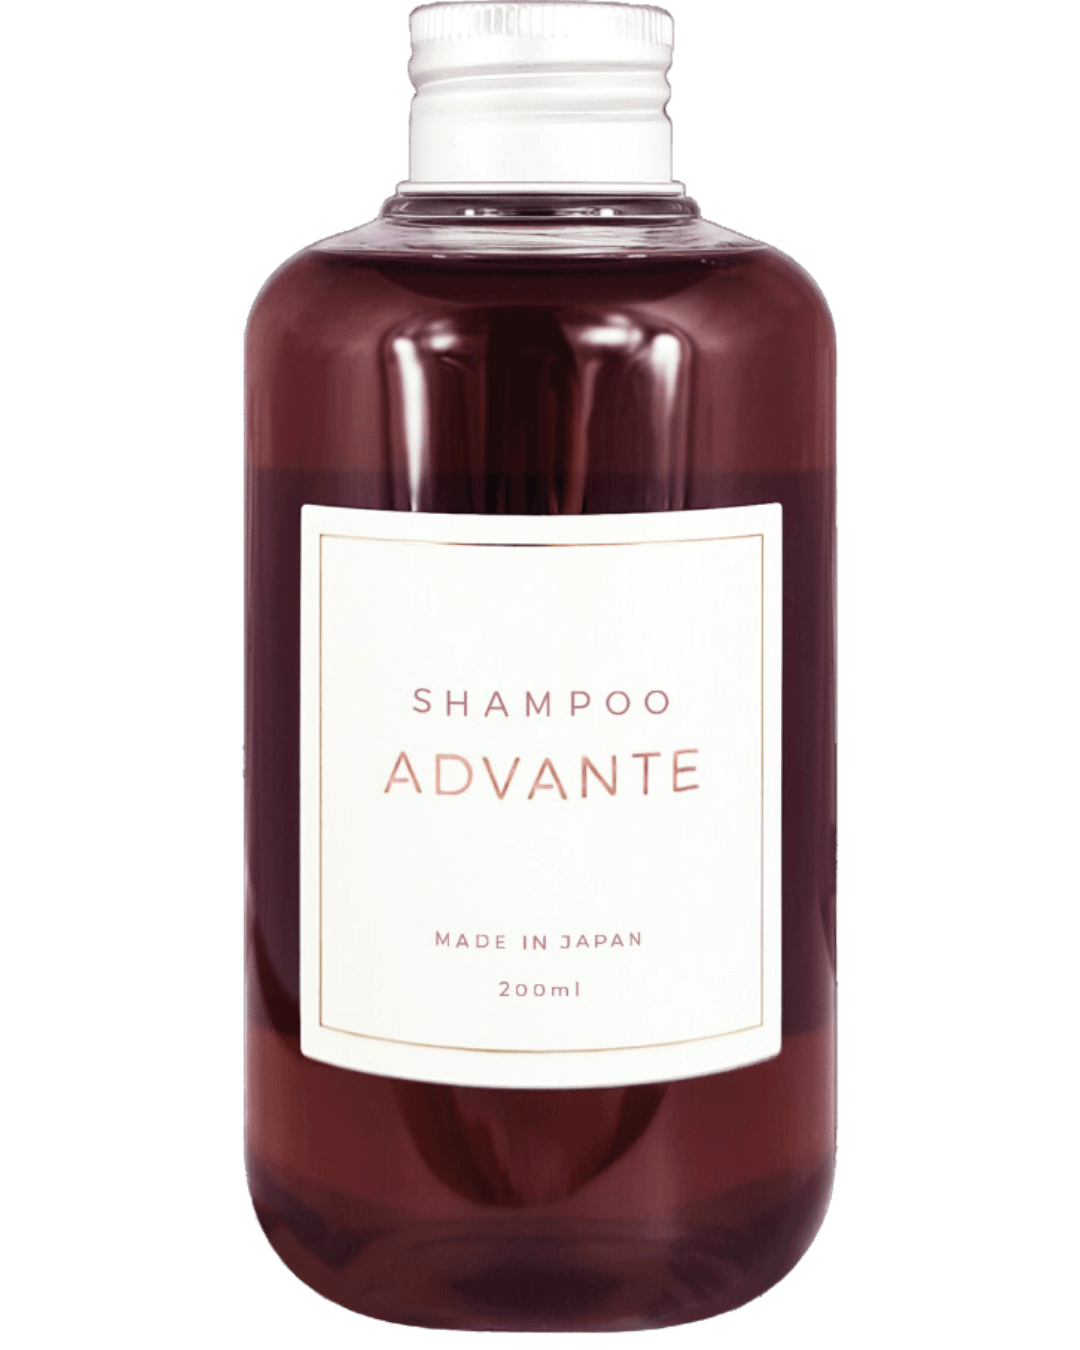 Daily Vanity Beauty Awards 2024 Best Hair care ADVANTE Shampoo Voted By Beauty Experts